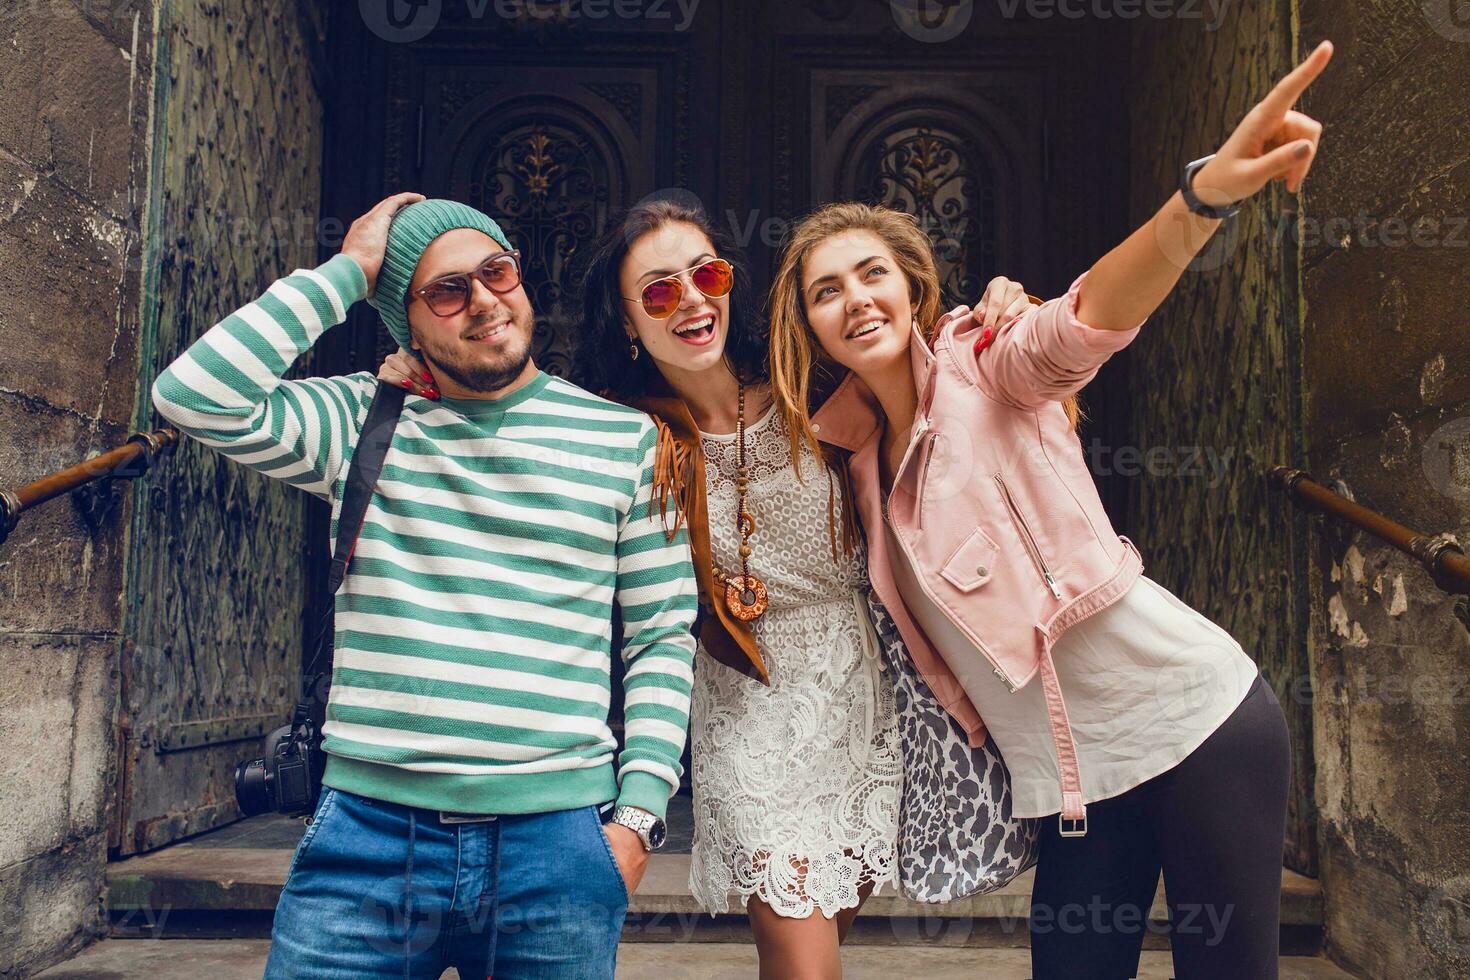 young hipster company of friends traveling, vintage style, europe vacation photo